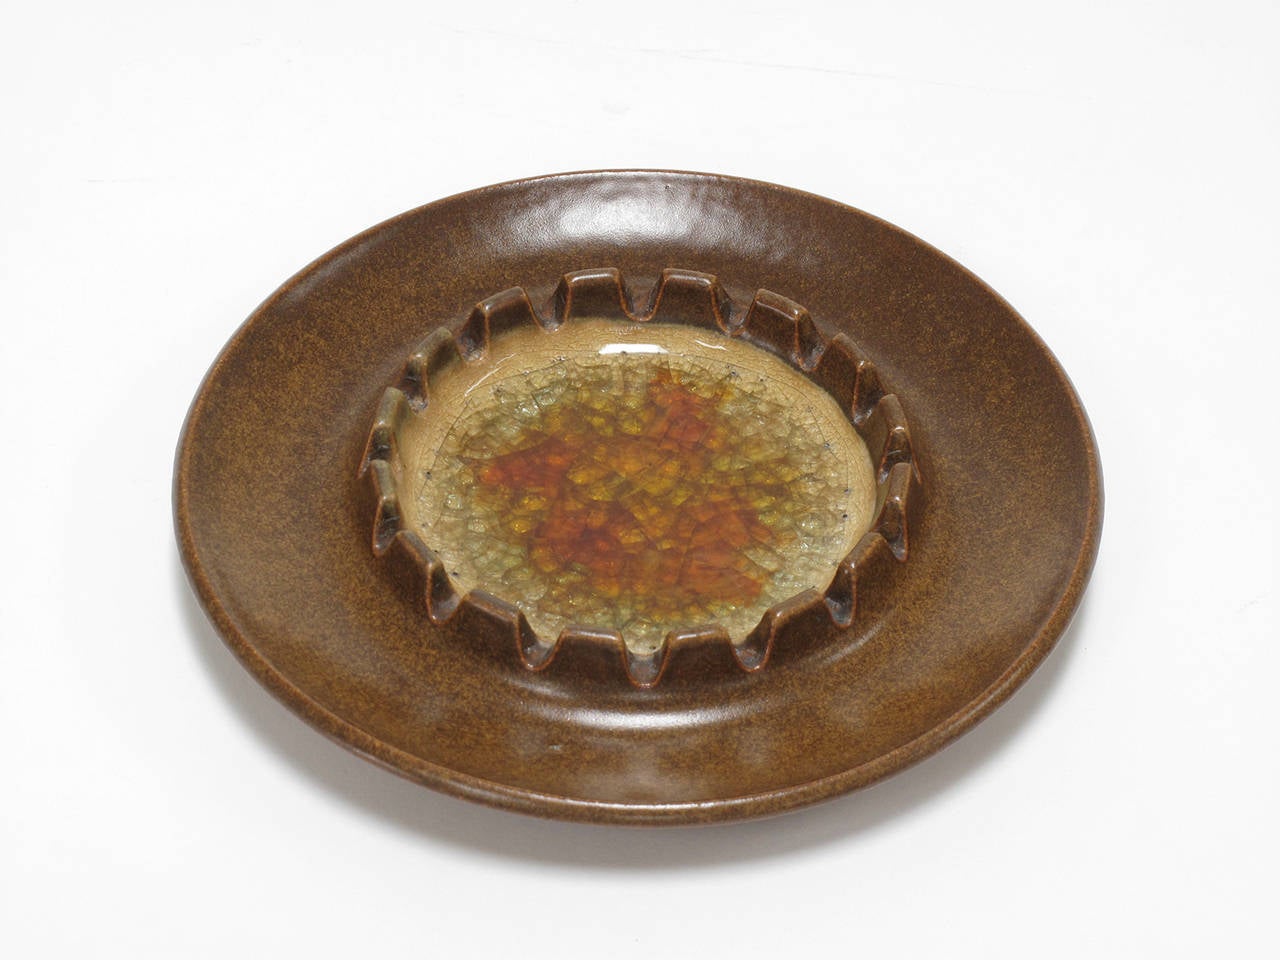 Glazed stoneware dish with melted Blenko glass center made by Robert Maxwell, California, 1965, signed by the artist.